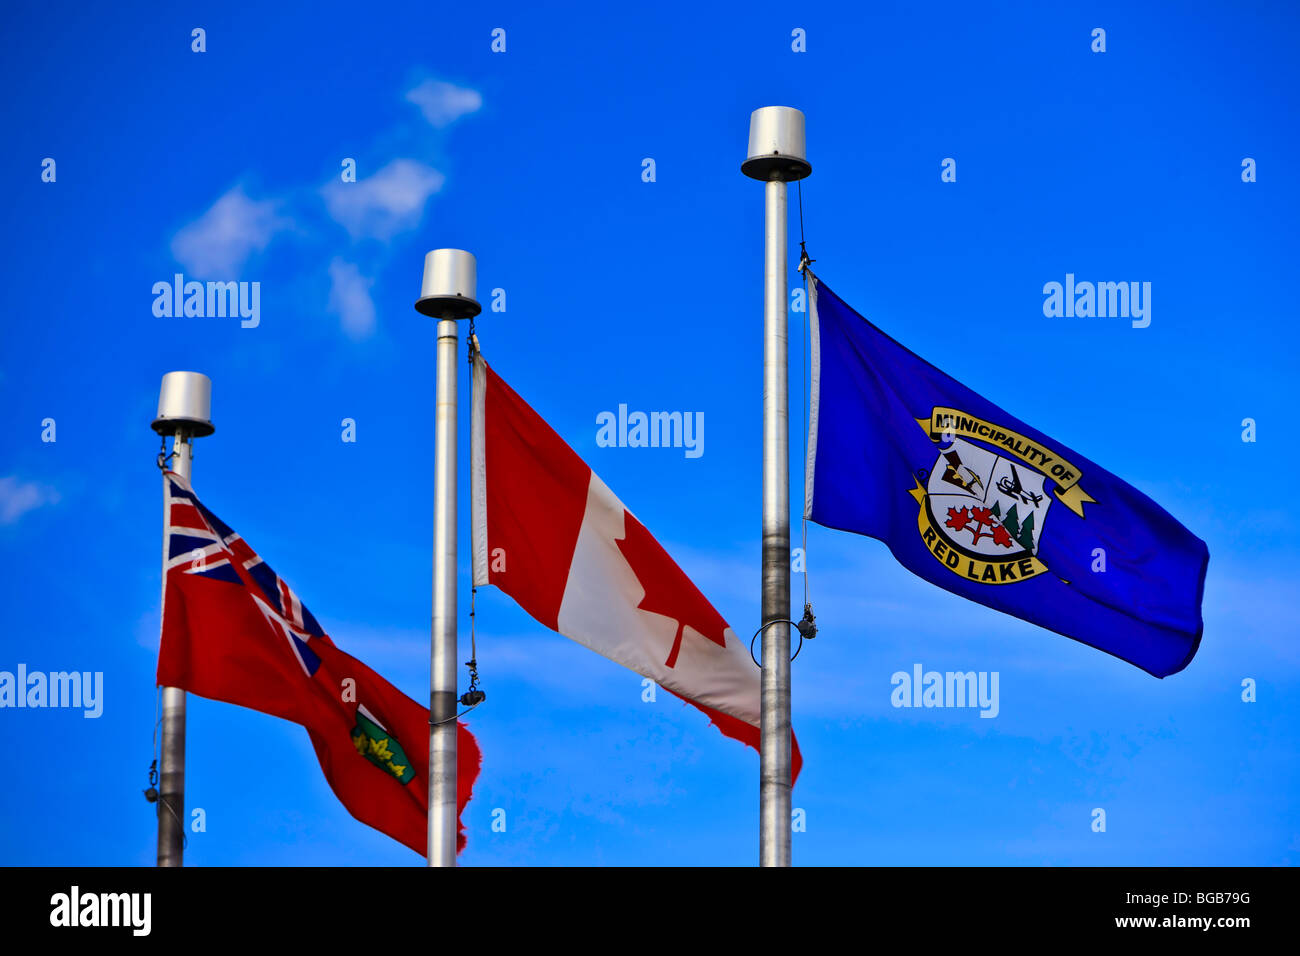 Three flags (Ontario, Canada, Red Lake) on the flag poles in the Norseman Heritage Centre Park in the town of Red Lake, Ontario, Stock Photo